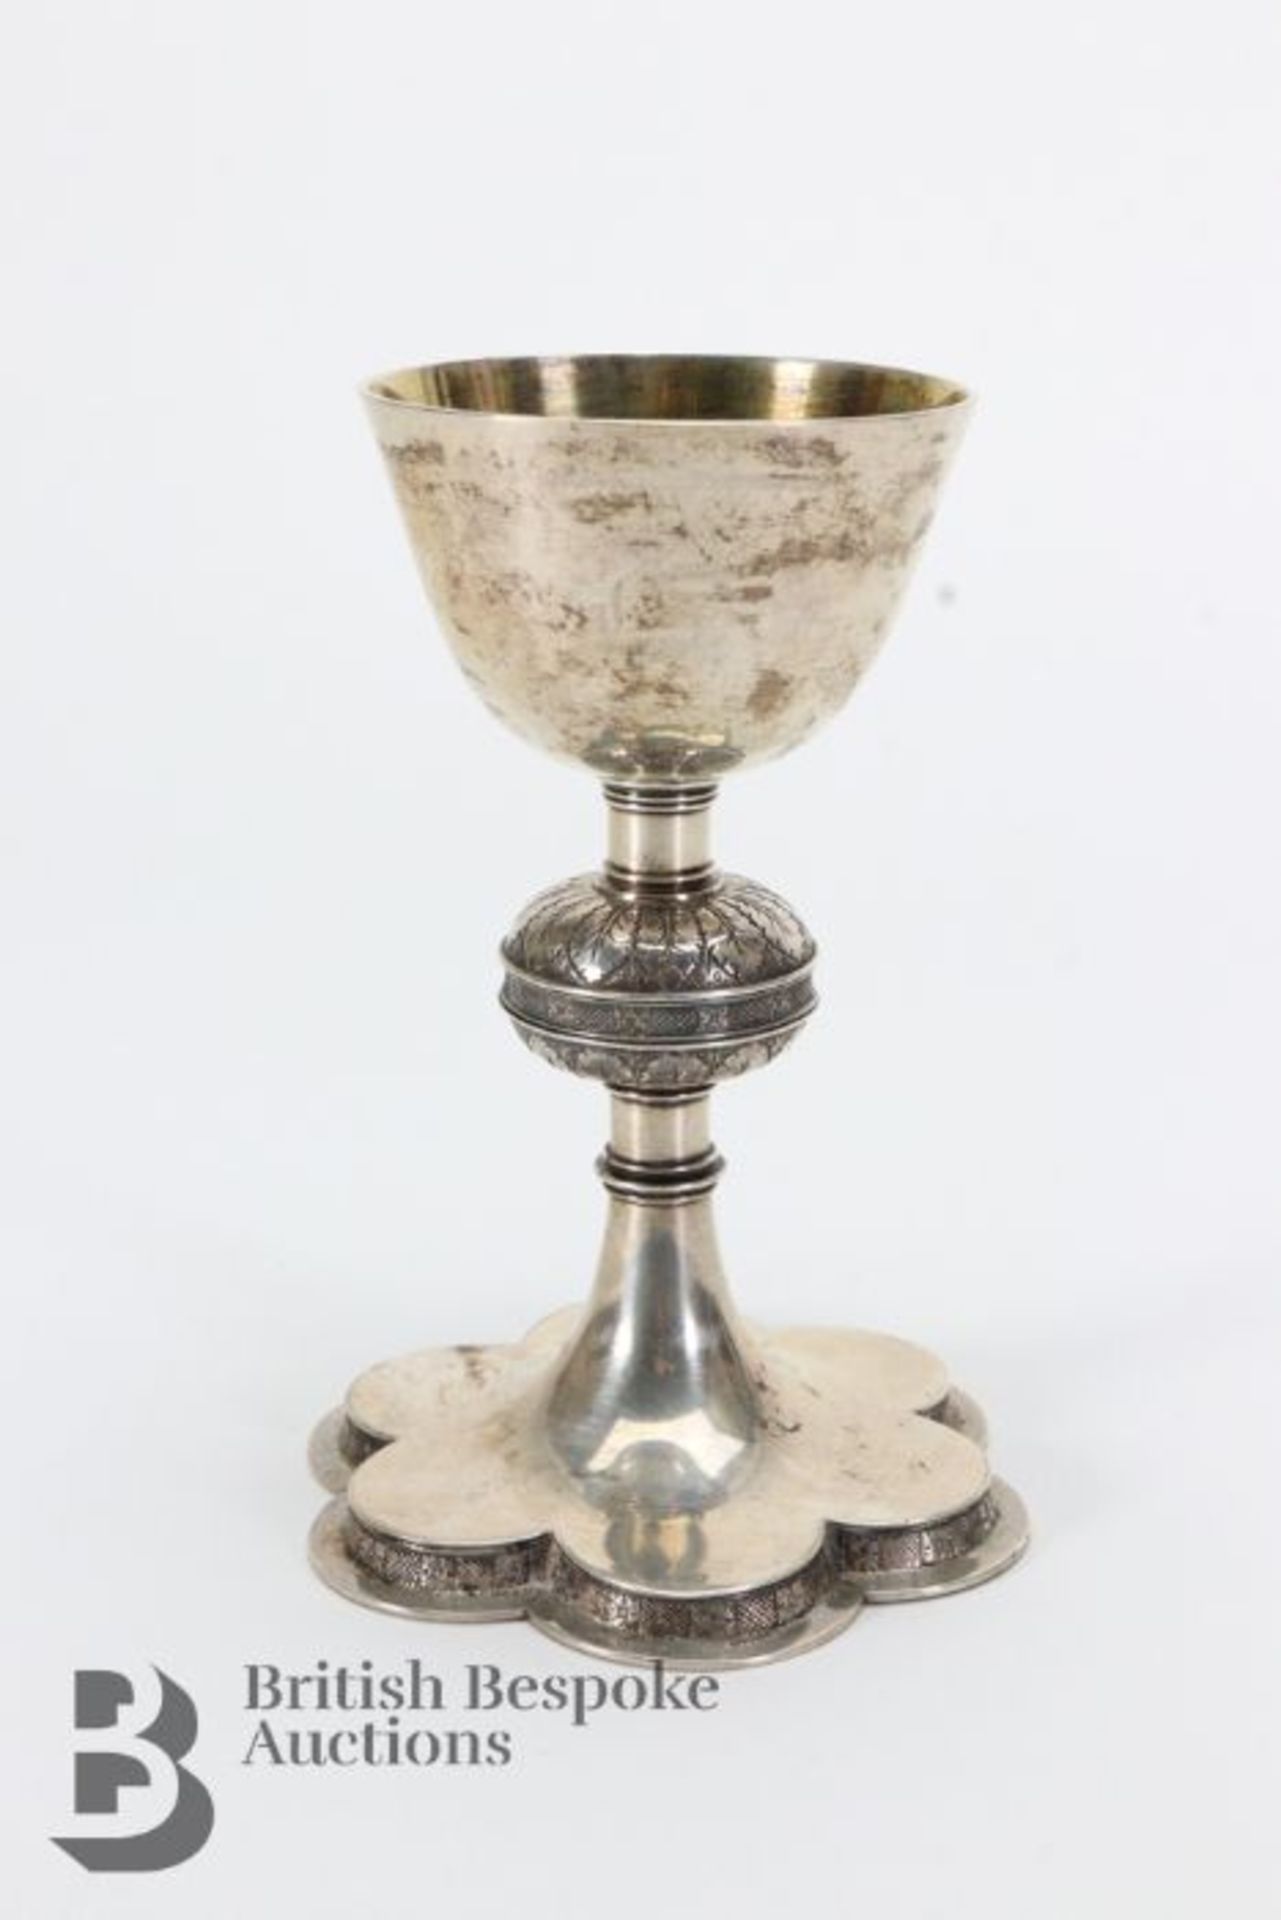 Silver Travelling Communion Set - Image 7 of 7